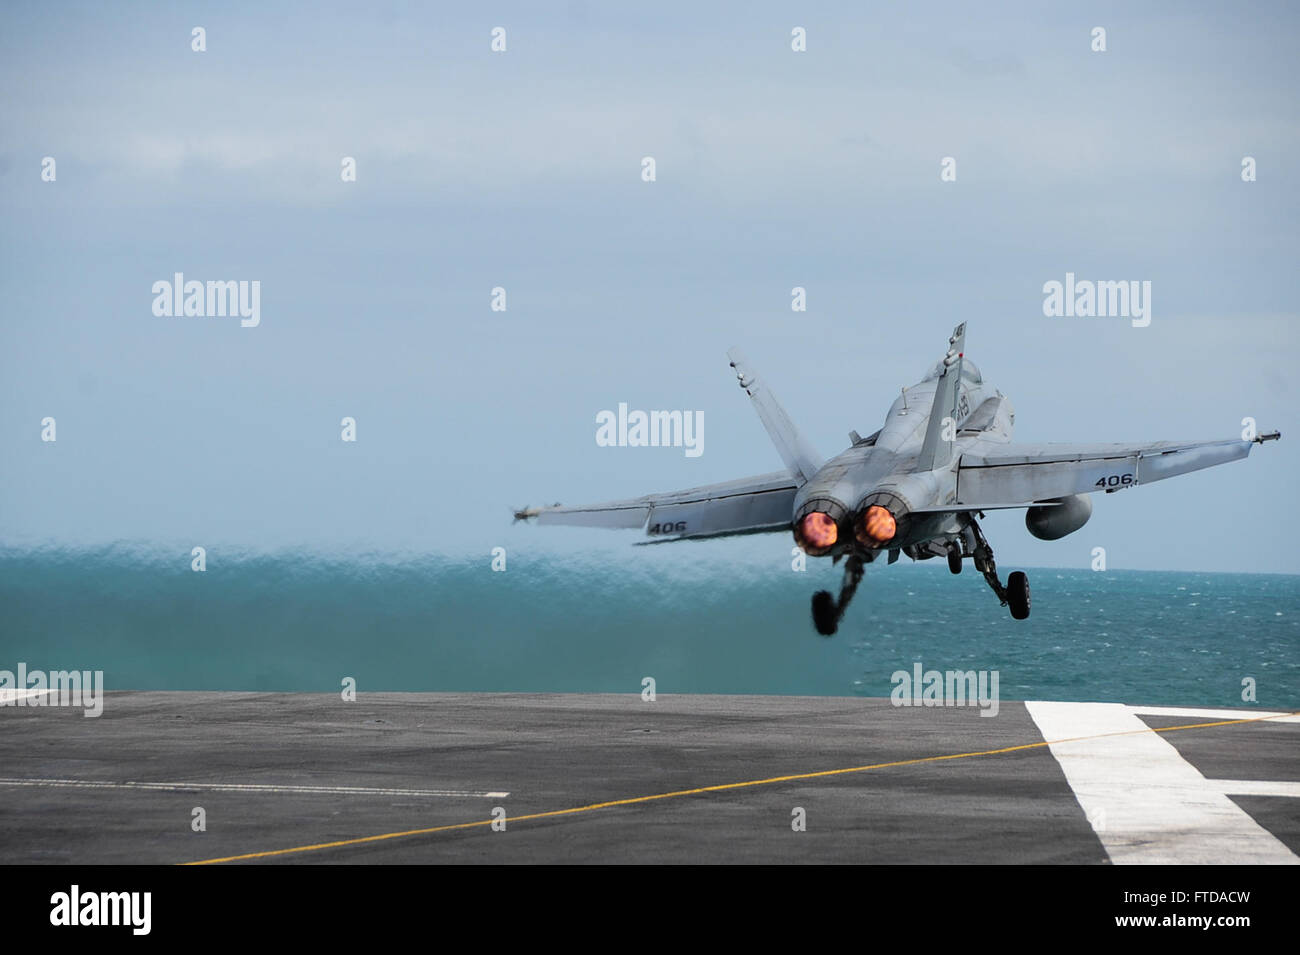 150322-N-ZF498-233 ATLANTIC OCEAN (March 22, 2015) An F/A-18C Hornet, assigned to the “Thunderbolts” of Marine Strike Fighter Attack Squadron (VMFA) 251, launches from the flight deck of the Nimitz-class aircraft carrier USS Theodore Roosevelt (CVN 71) March 22, 2015. Theodore Roosevelt, homeported in Norfolk, is conducting naval operations in the U.S. 6th Fleet area of operations in support of U.S. national security interests in Europe. (U.S. Navy photo by Mass Communication Specialist 3rd Class Anthony N. Hilkowski/Released) Stock Photo